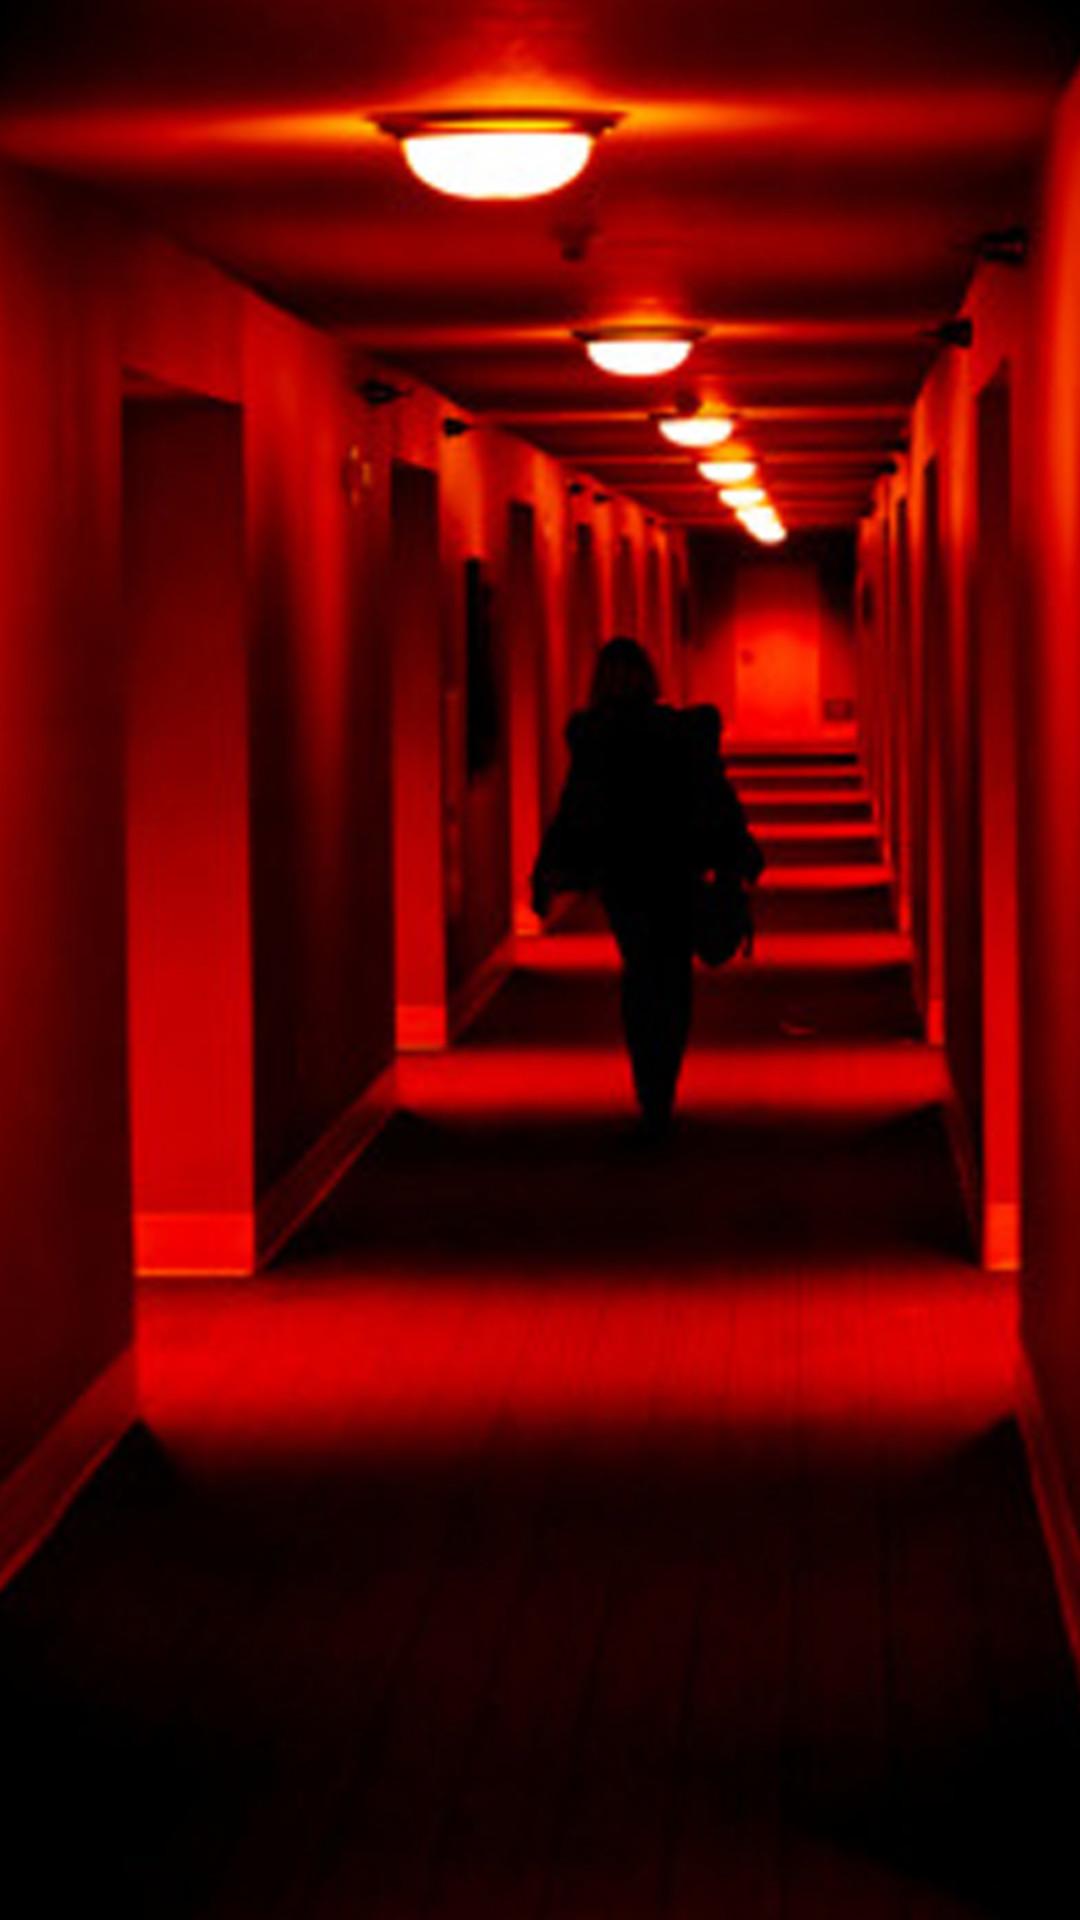 A person walking down an empty hallway - Red, light red, iPhone red